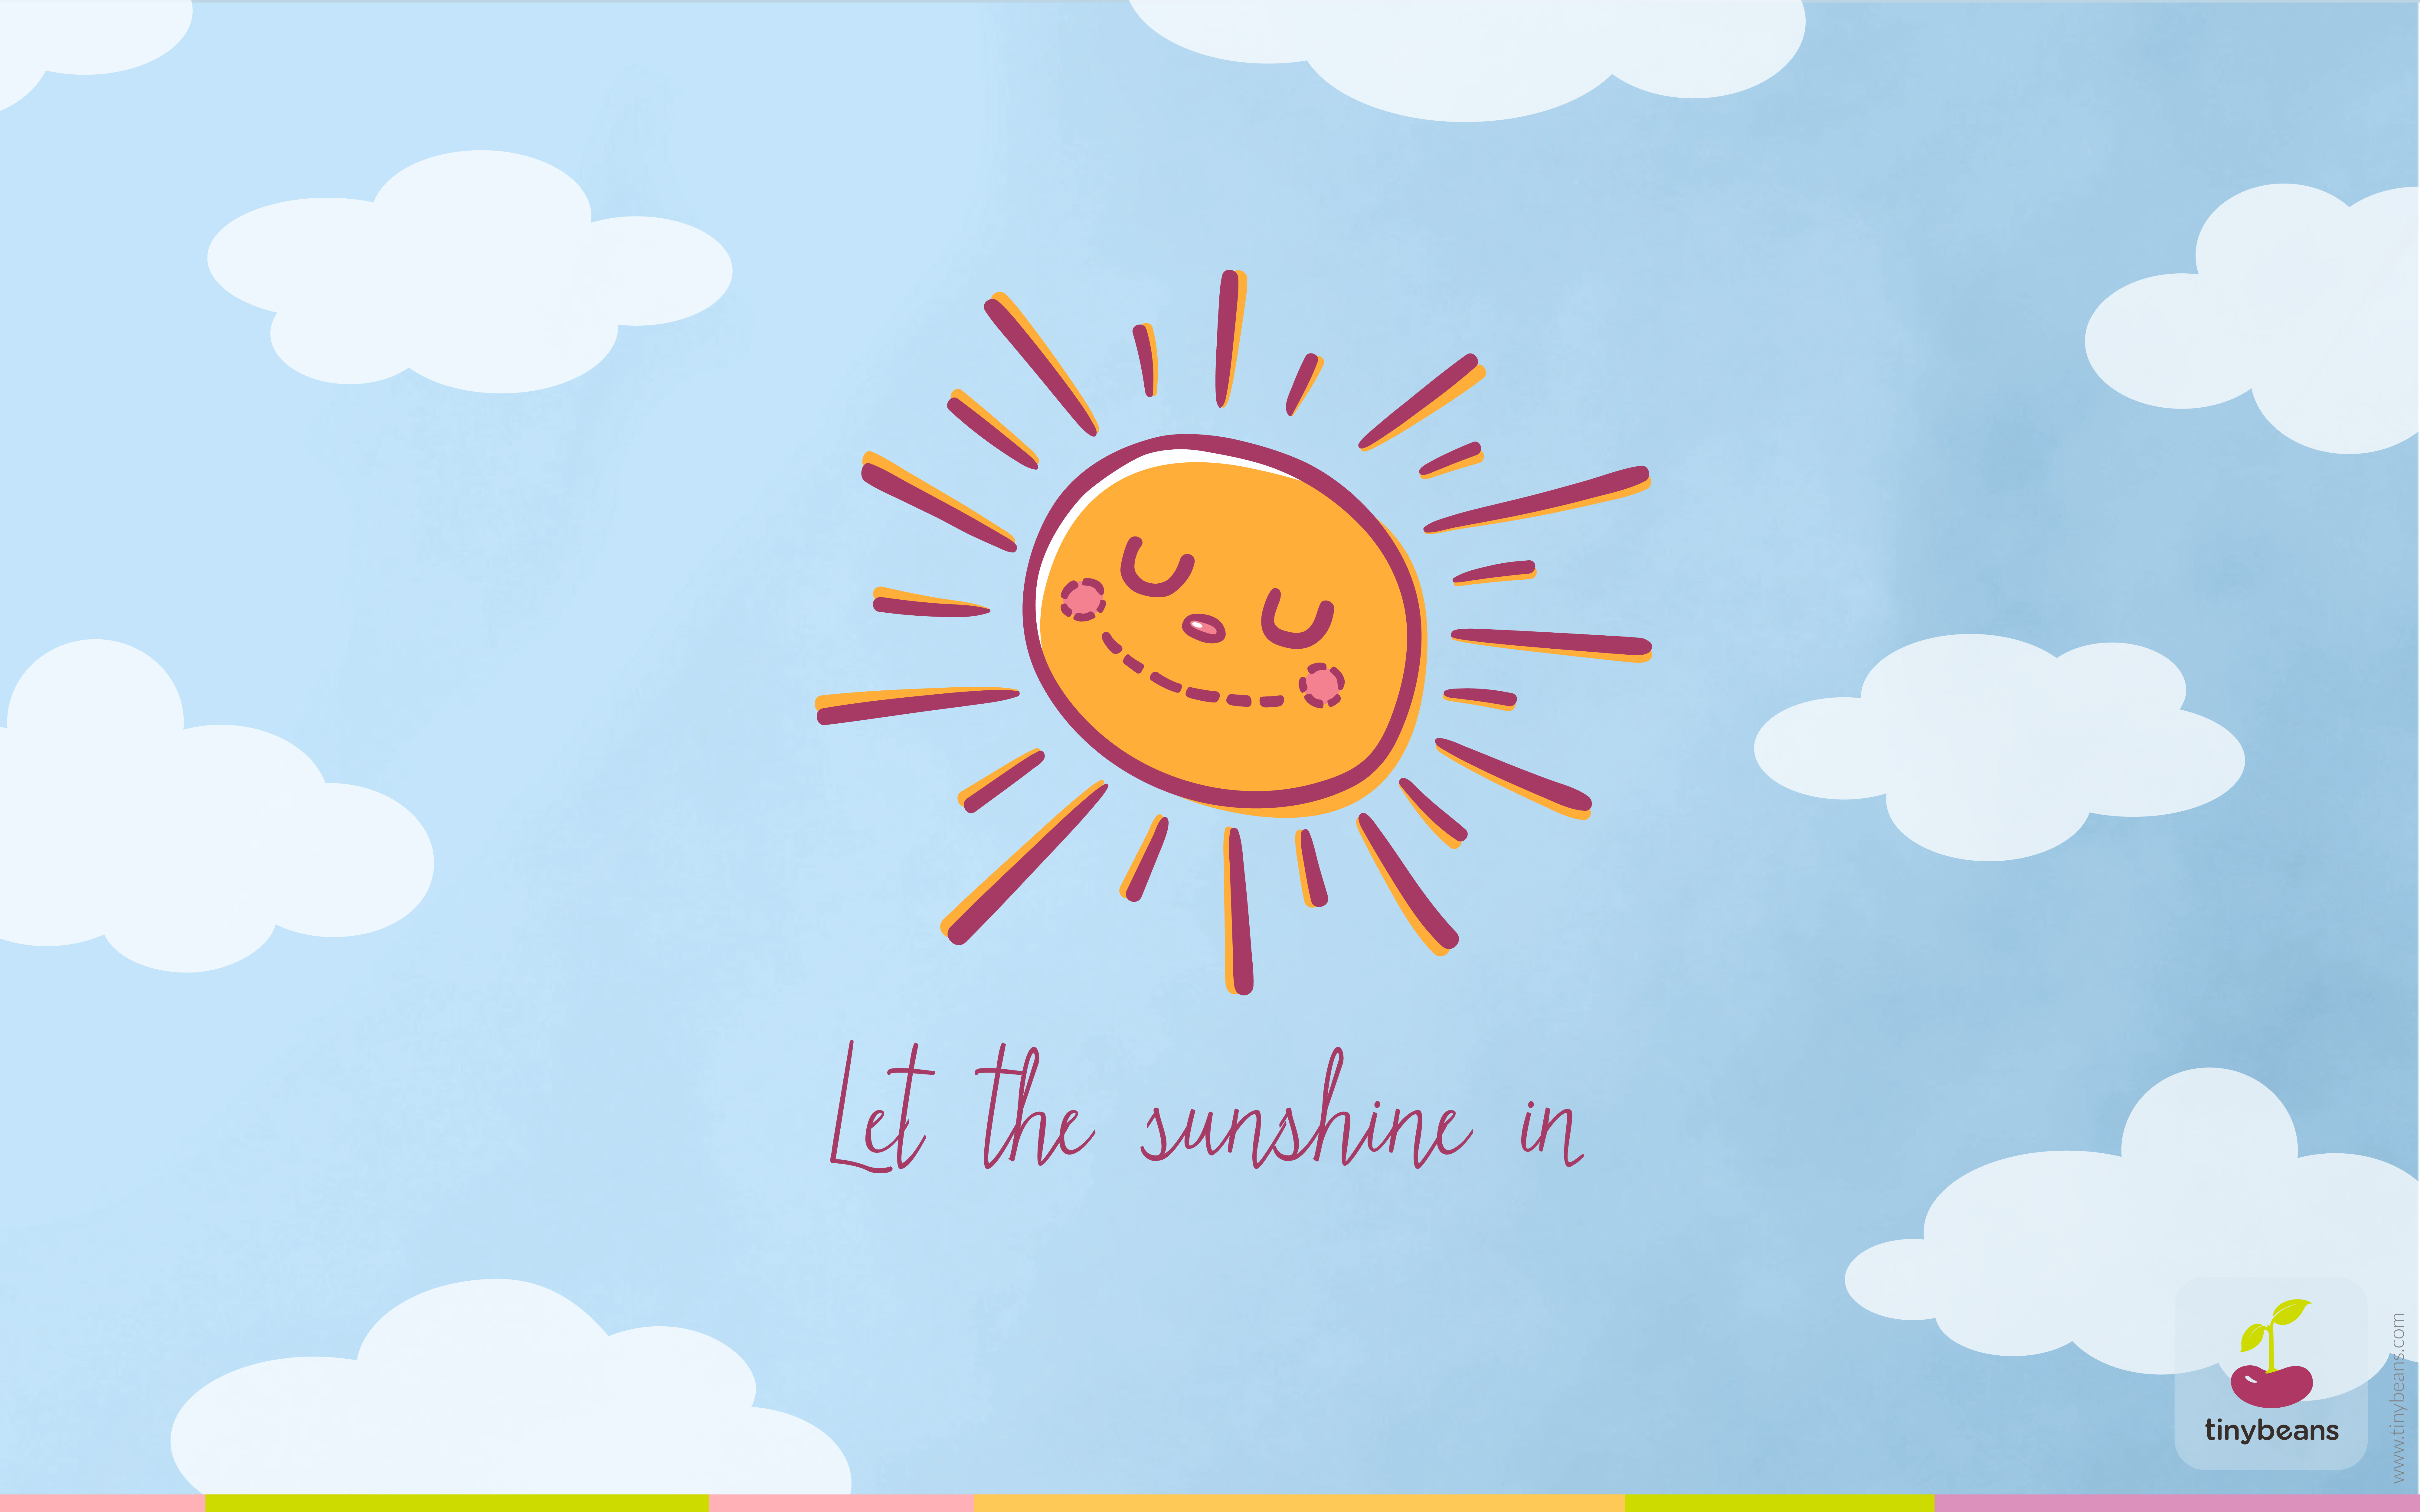 Let the sunshine in this August | Tinybeans